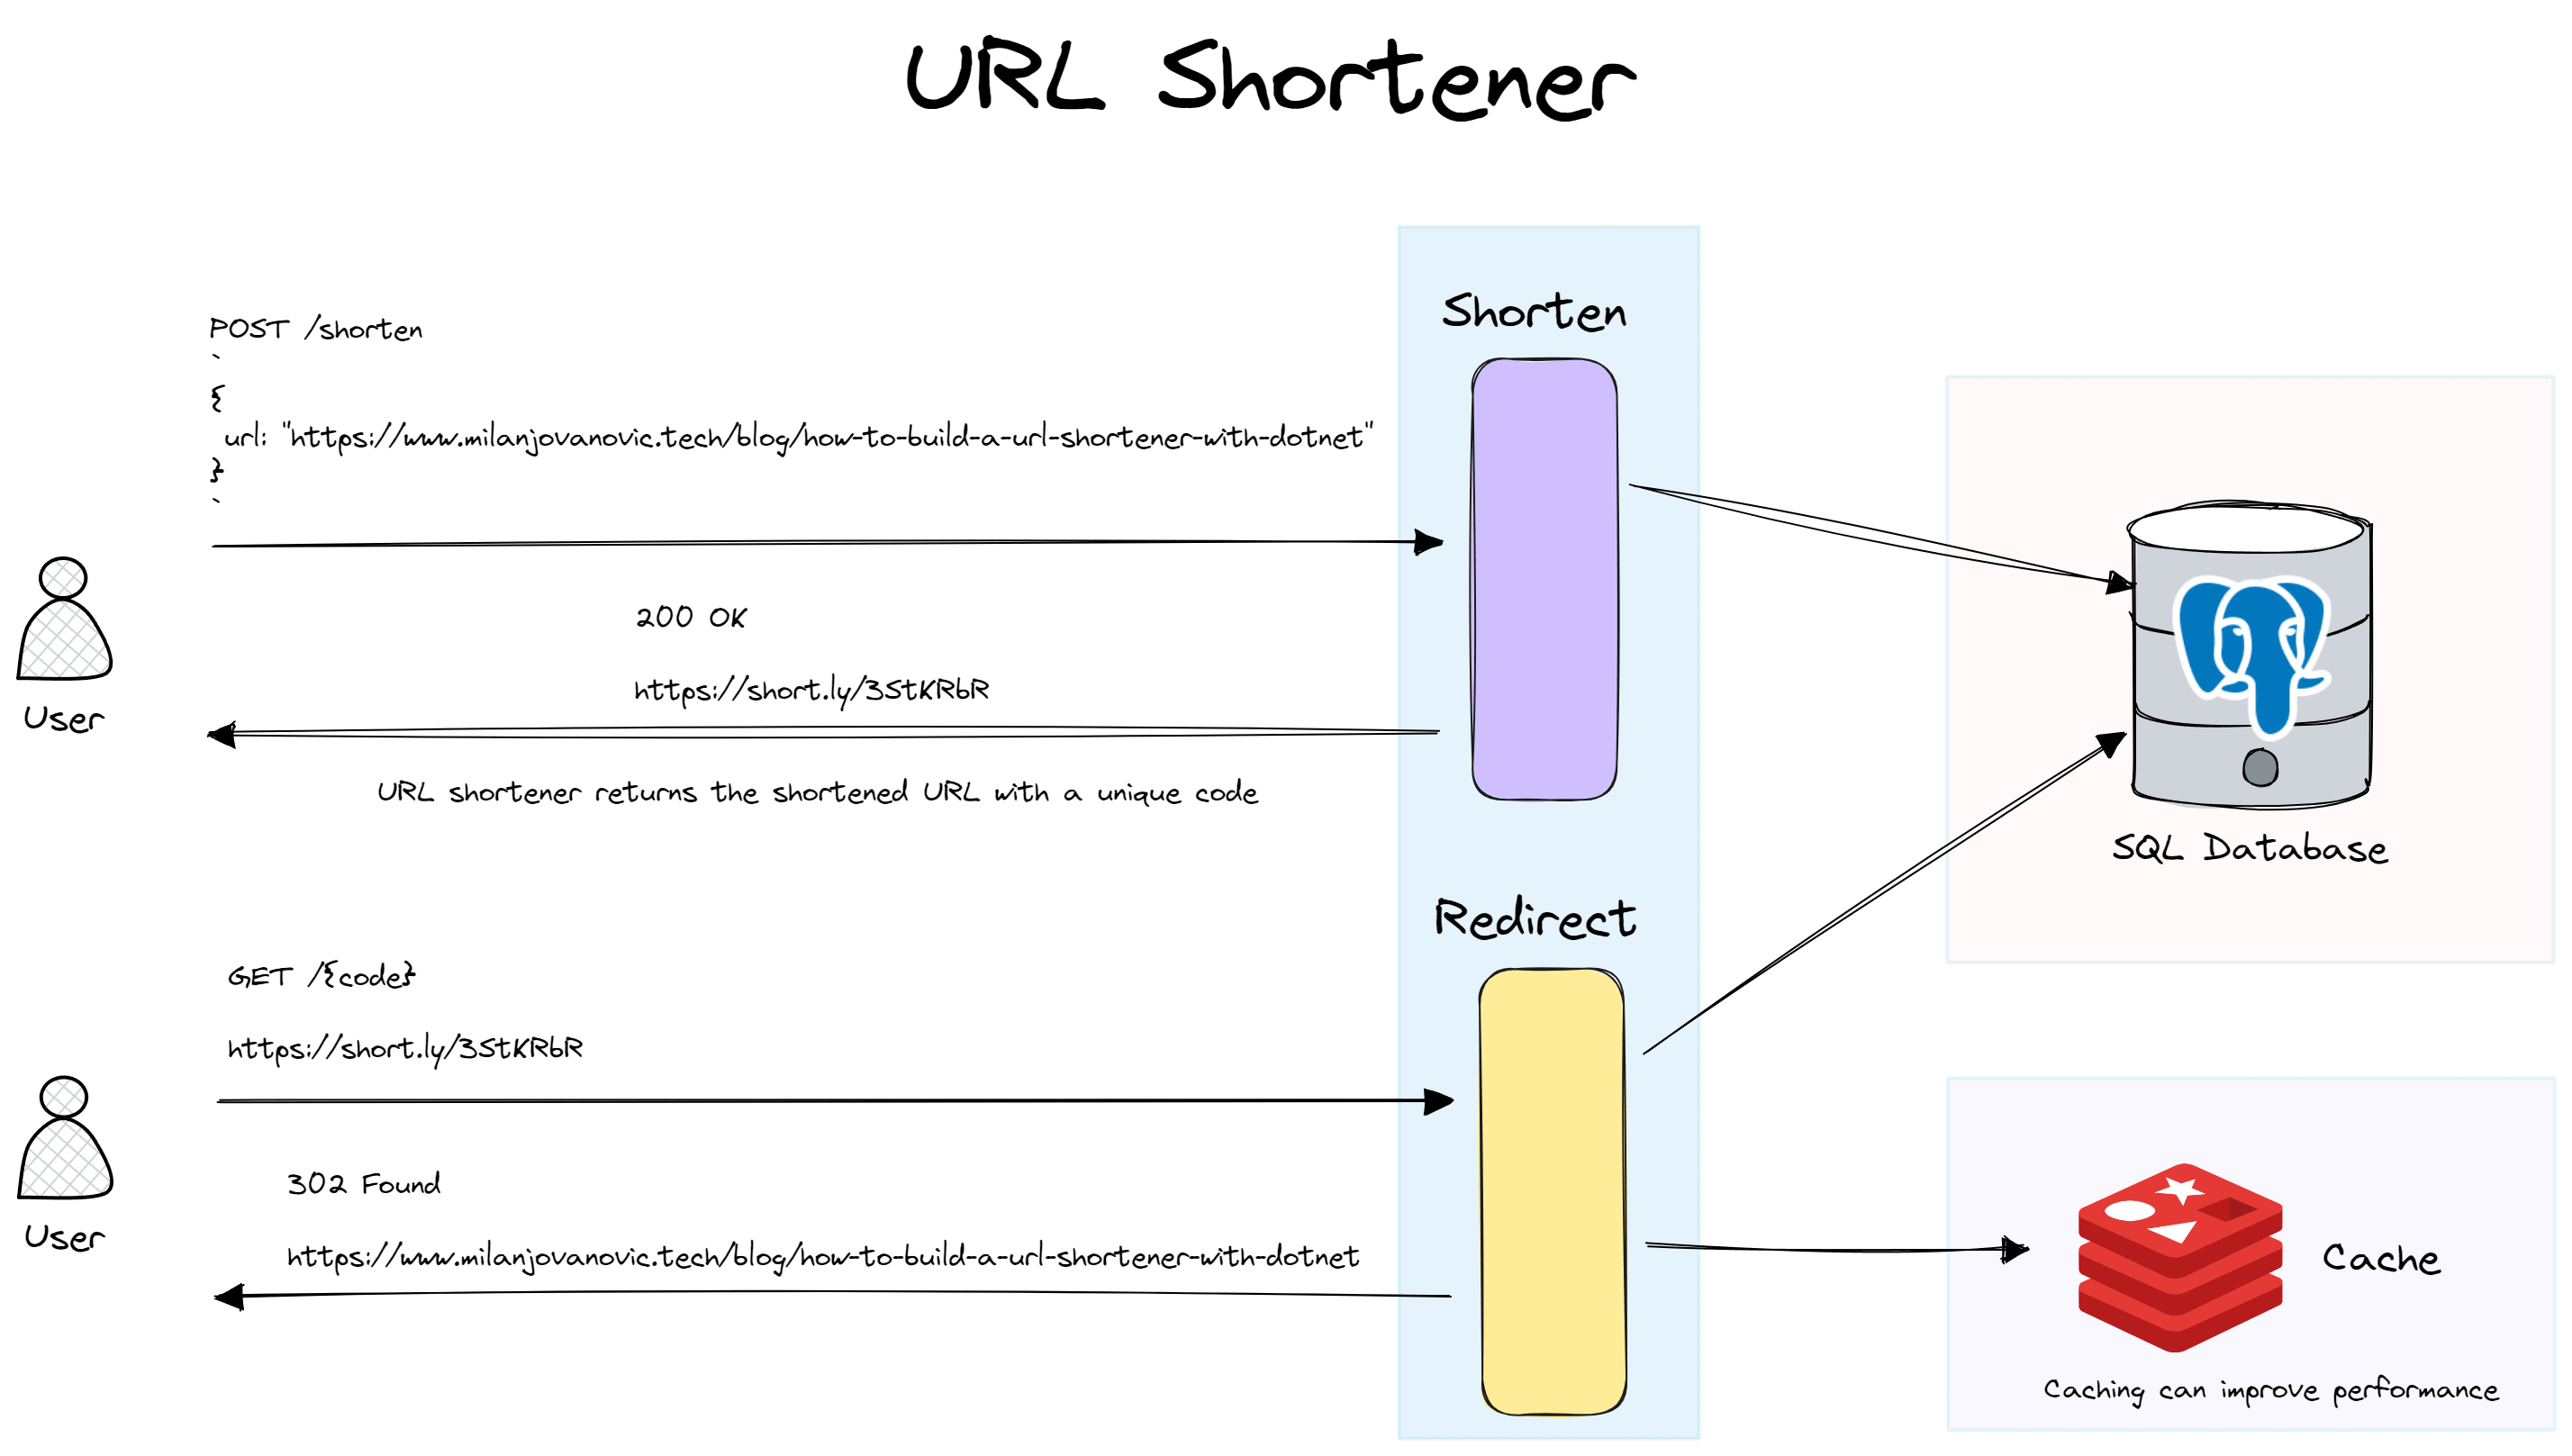 URL shortener system design. It contains two API endpoints, a PostgreSQL database, and a Redis cache.